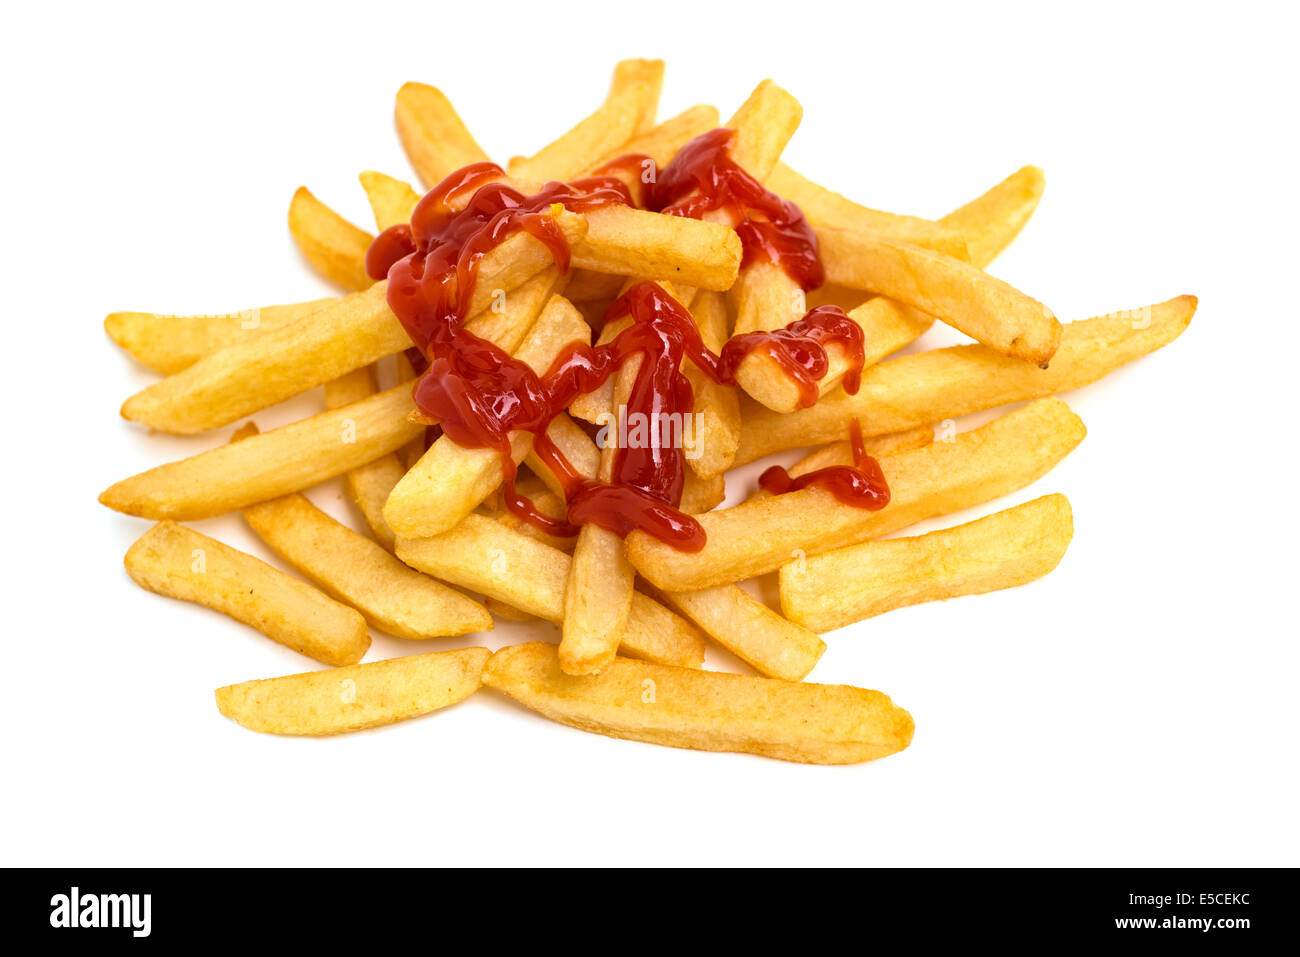 Pommes, Pommes Frites mit Ketchup Catsup Sauce Stockfoto